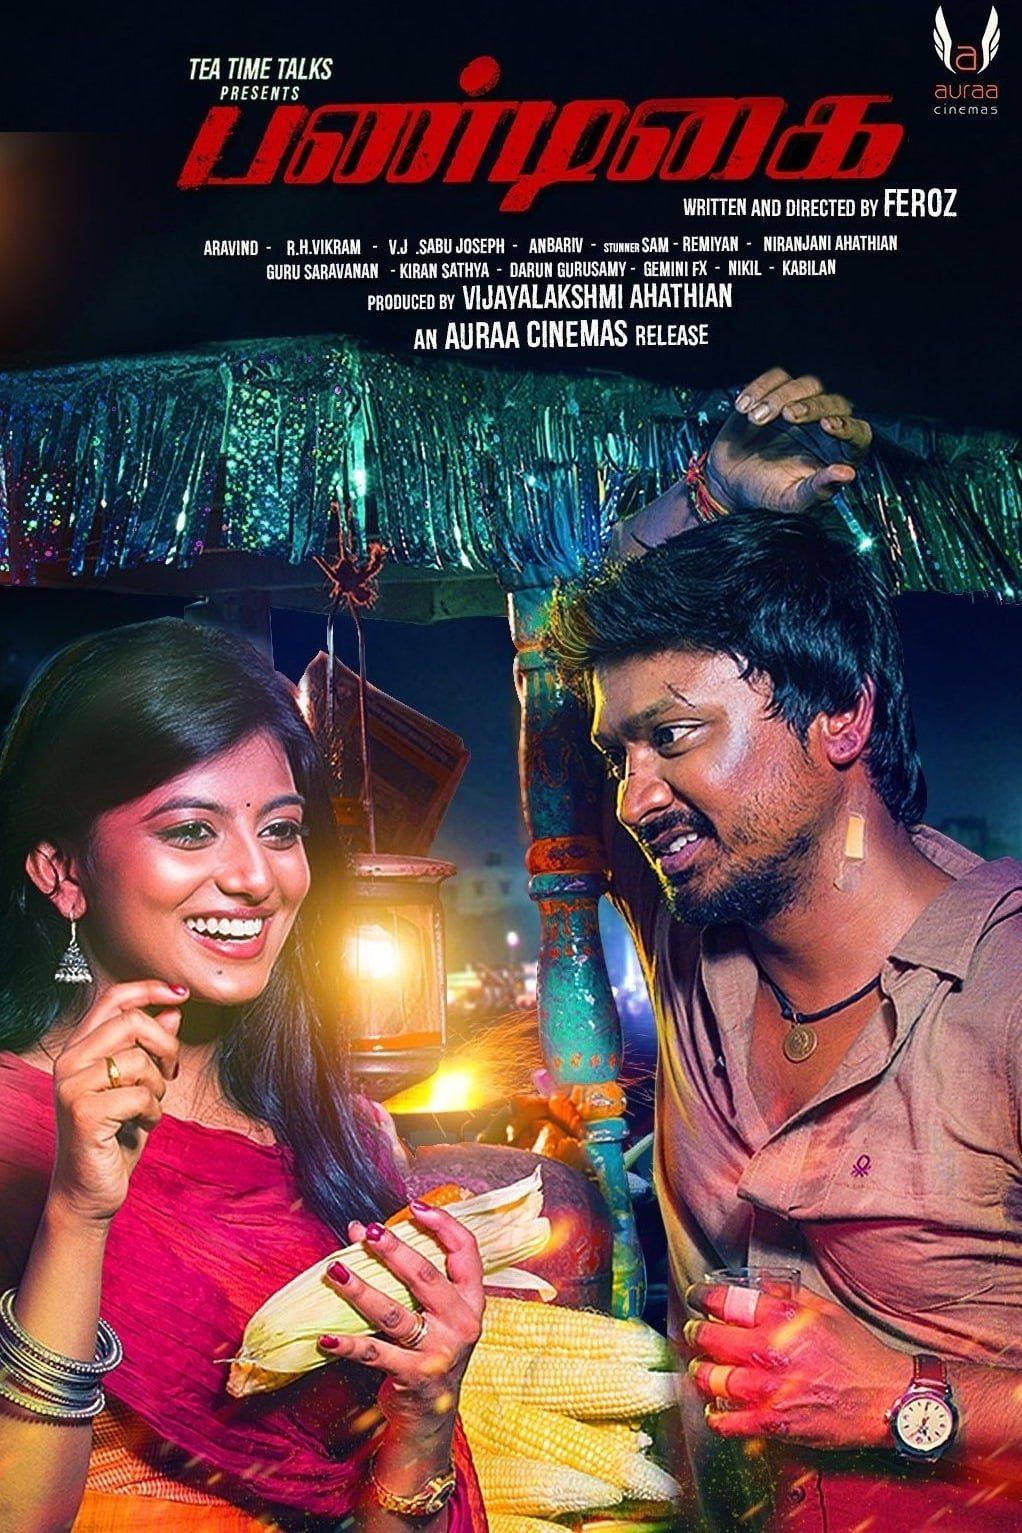 Poster for the movie "Pandigai"